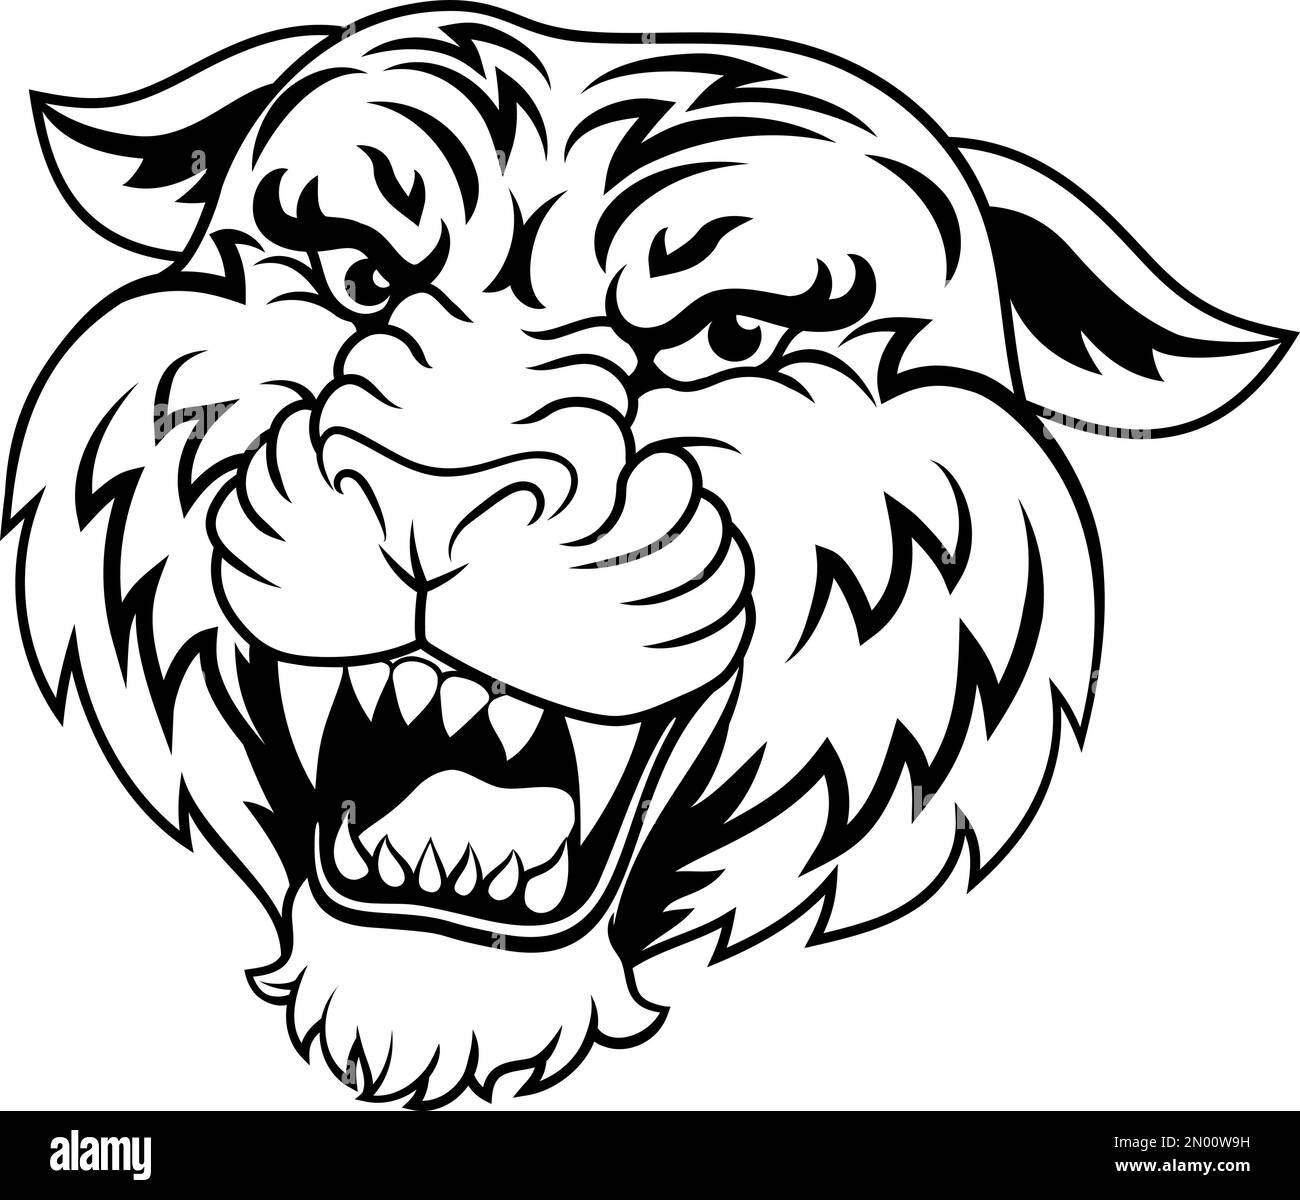 Tiger Angry Tigers Team Sports Mascot Roaring Stock Vector